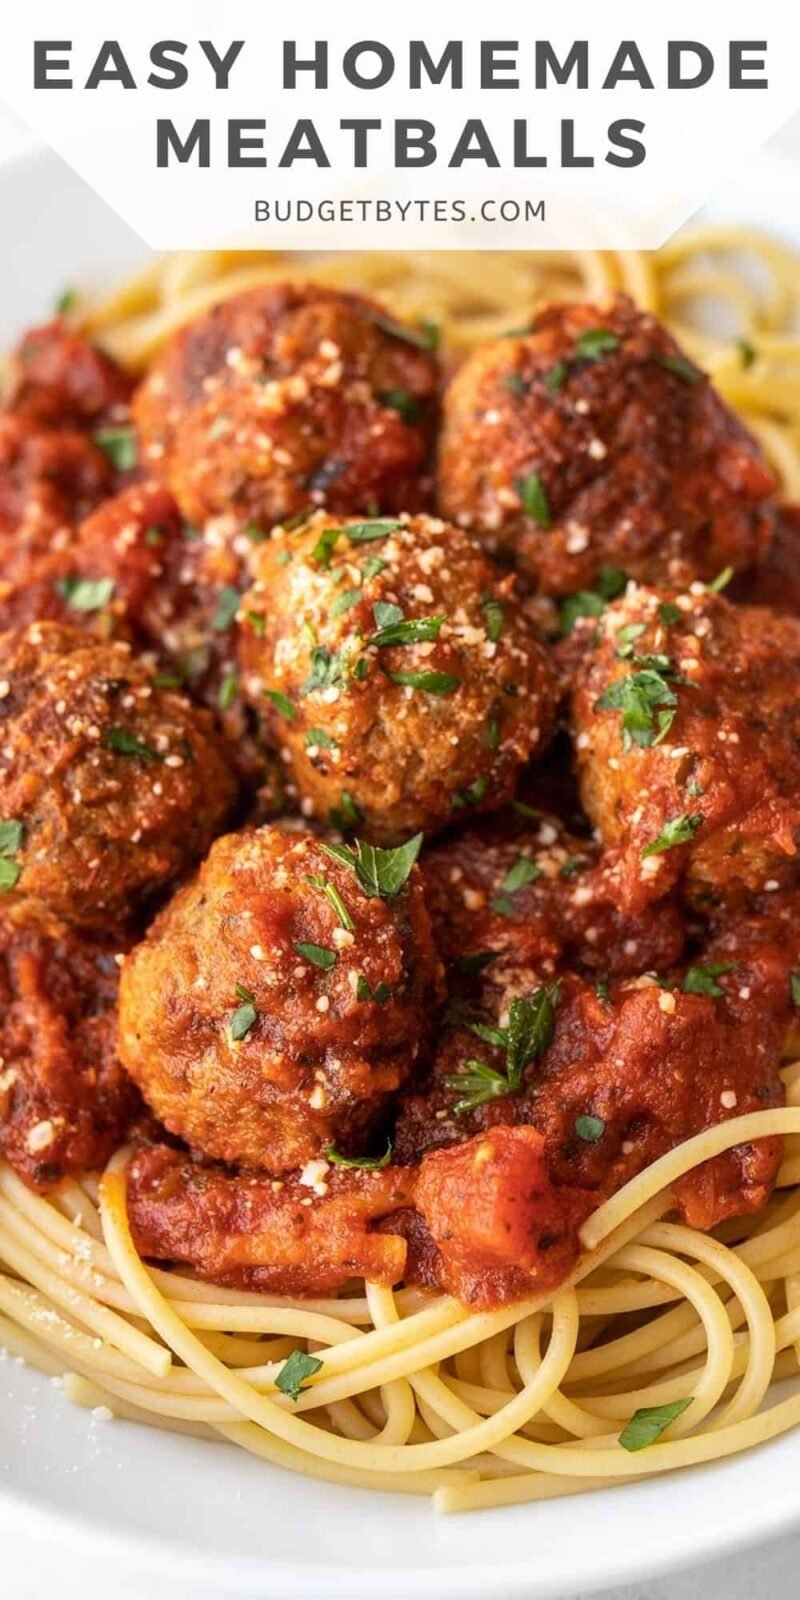 close up of a plate of spaghetti with meatballs, title text at the top